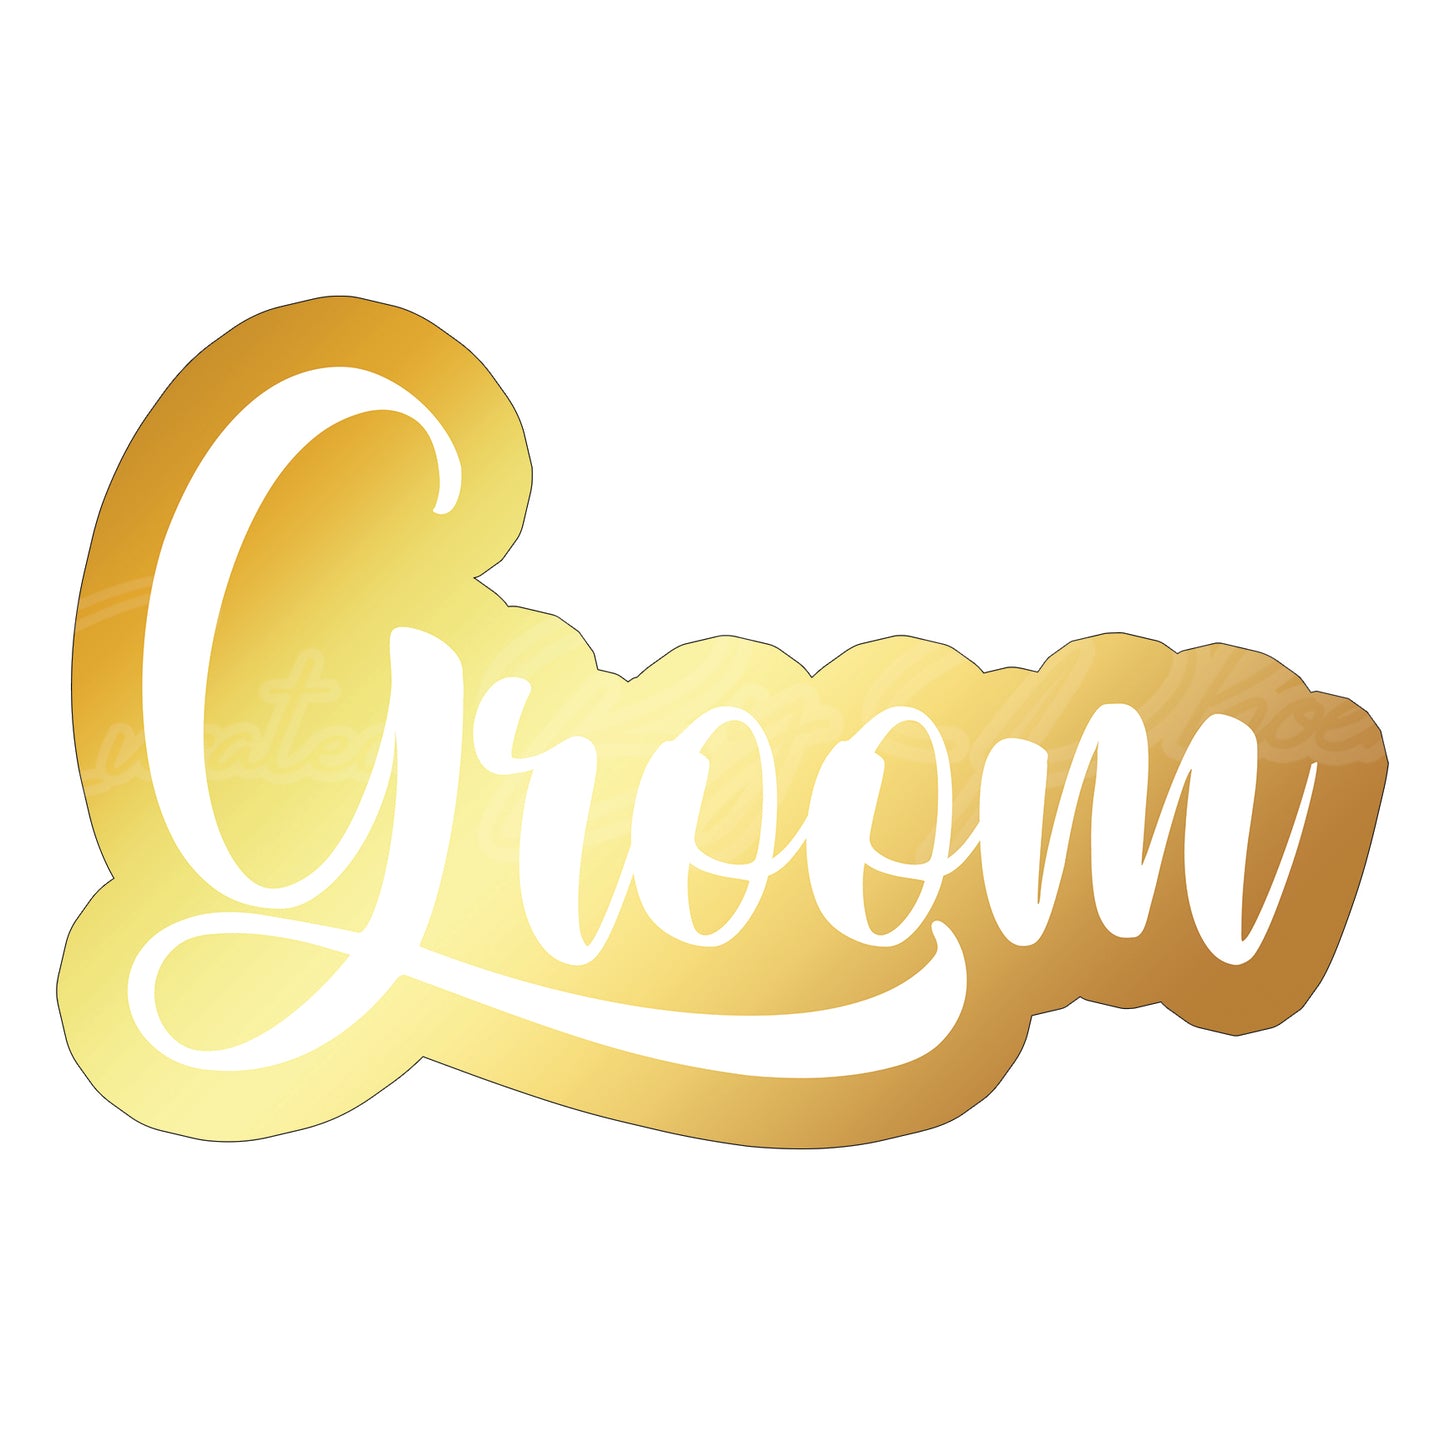  Groom  prop-wedding photo booth props- wedding props-photo booth props-custom wedding props- custom prop signs-props -Curated by Phoenix 